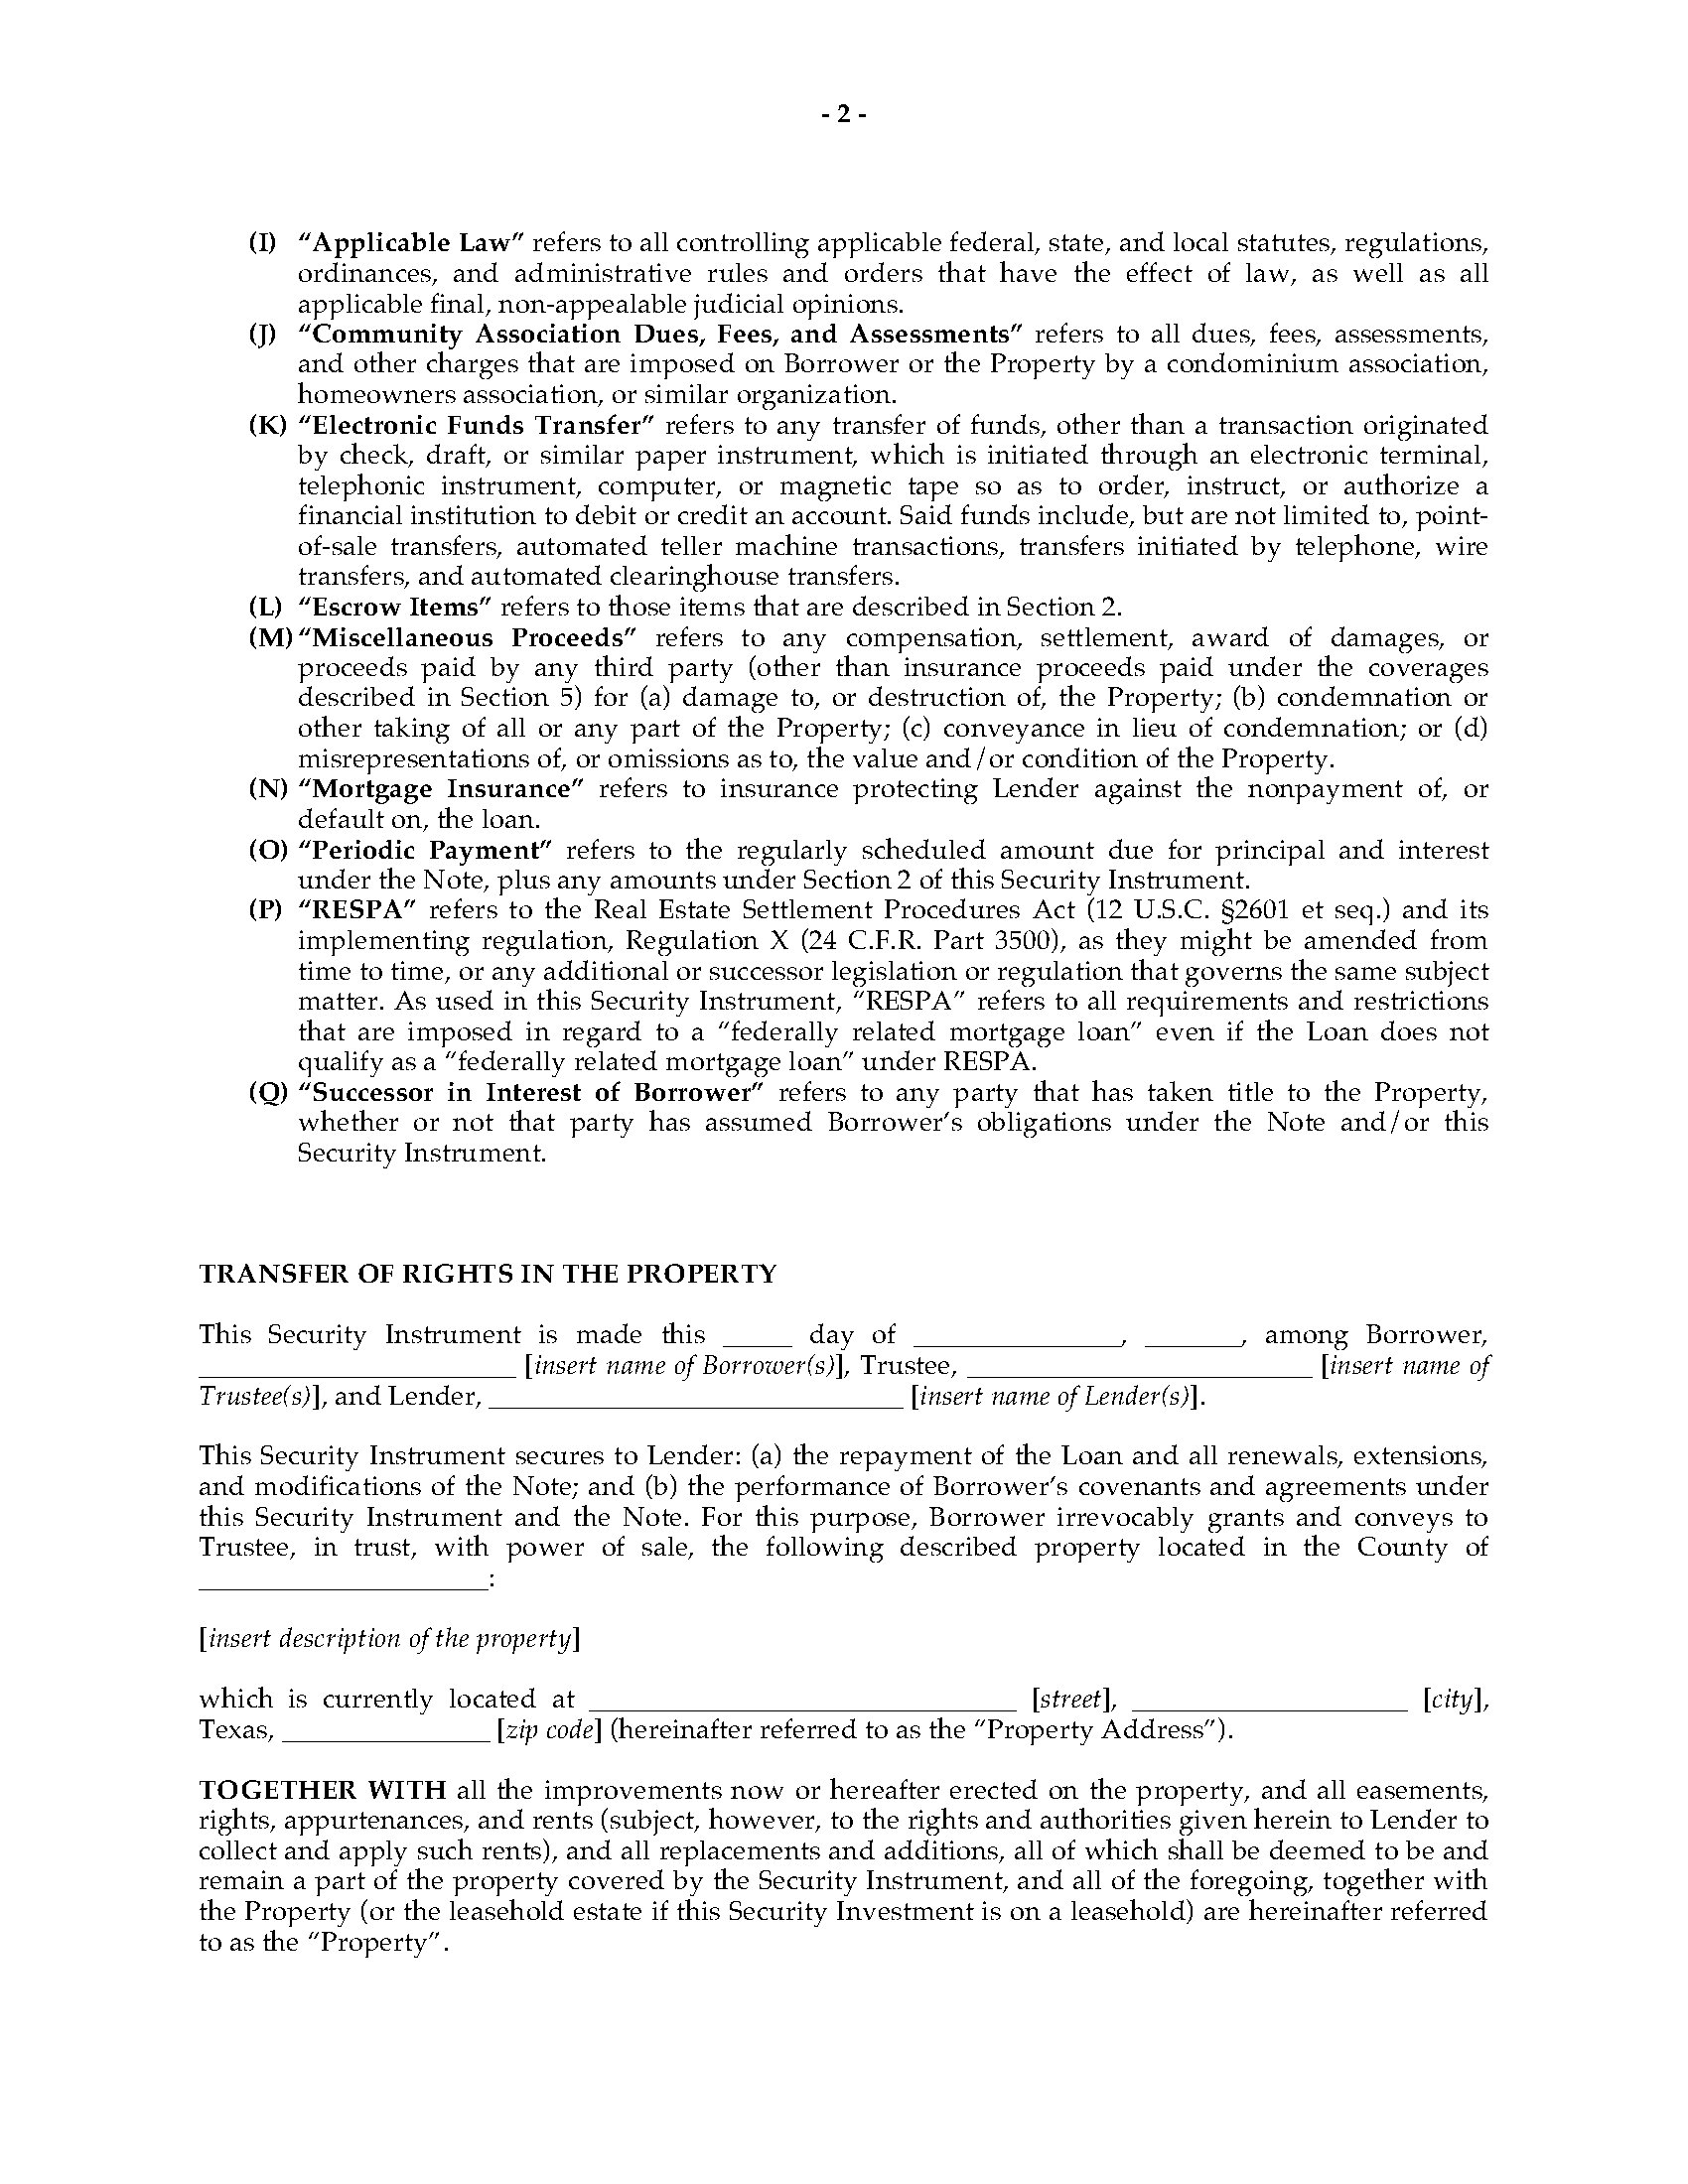 Texas Deed Of Trust Legal Forms And Business Templates Megadox Com